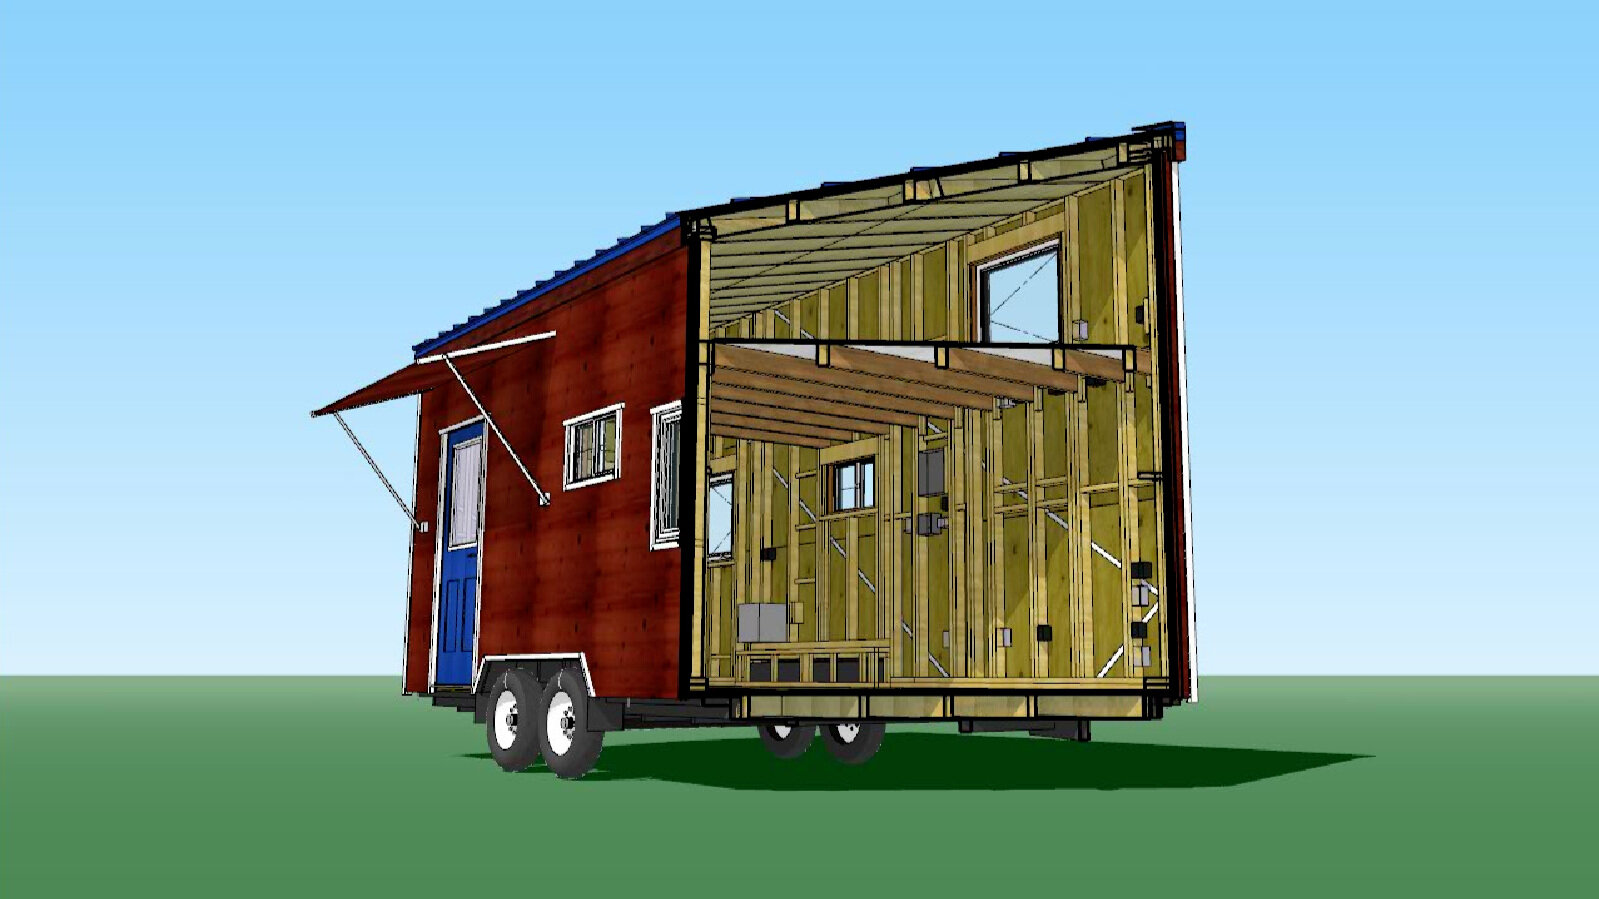 Tiny House Designing, Building and Living by Andrew Morrison